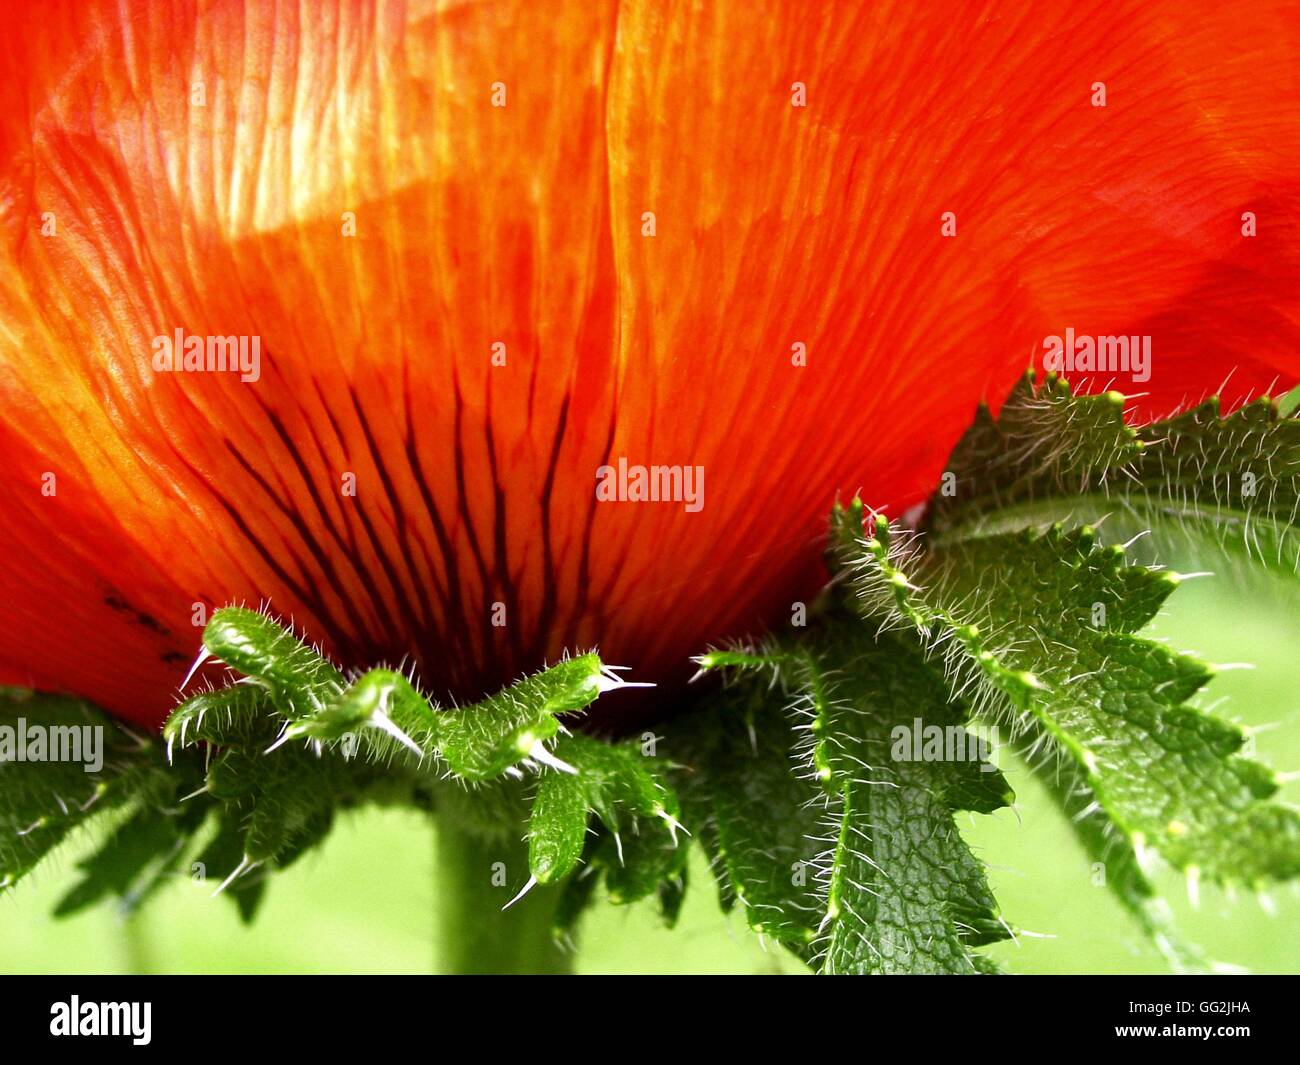 Papaver orientale 'Alegro' (macro) Bright cup-shaped orange-scarlet flower with bold, black basal marks and bristly green leaves which have lance-shaped tooth segments. Stock Photo